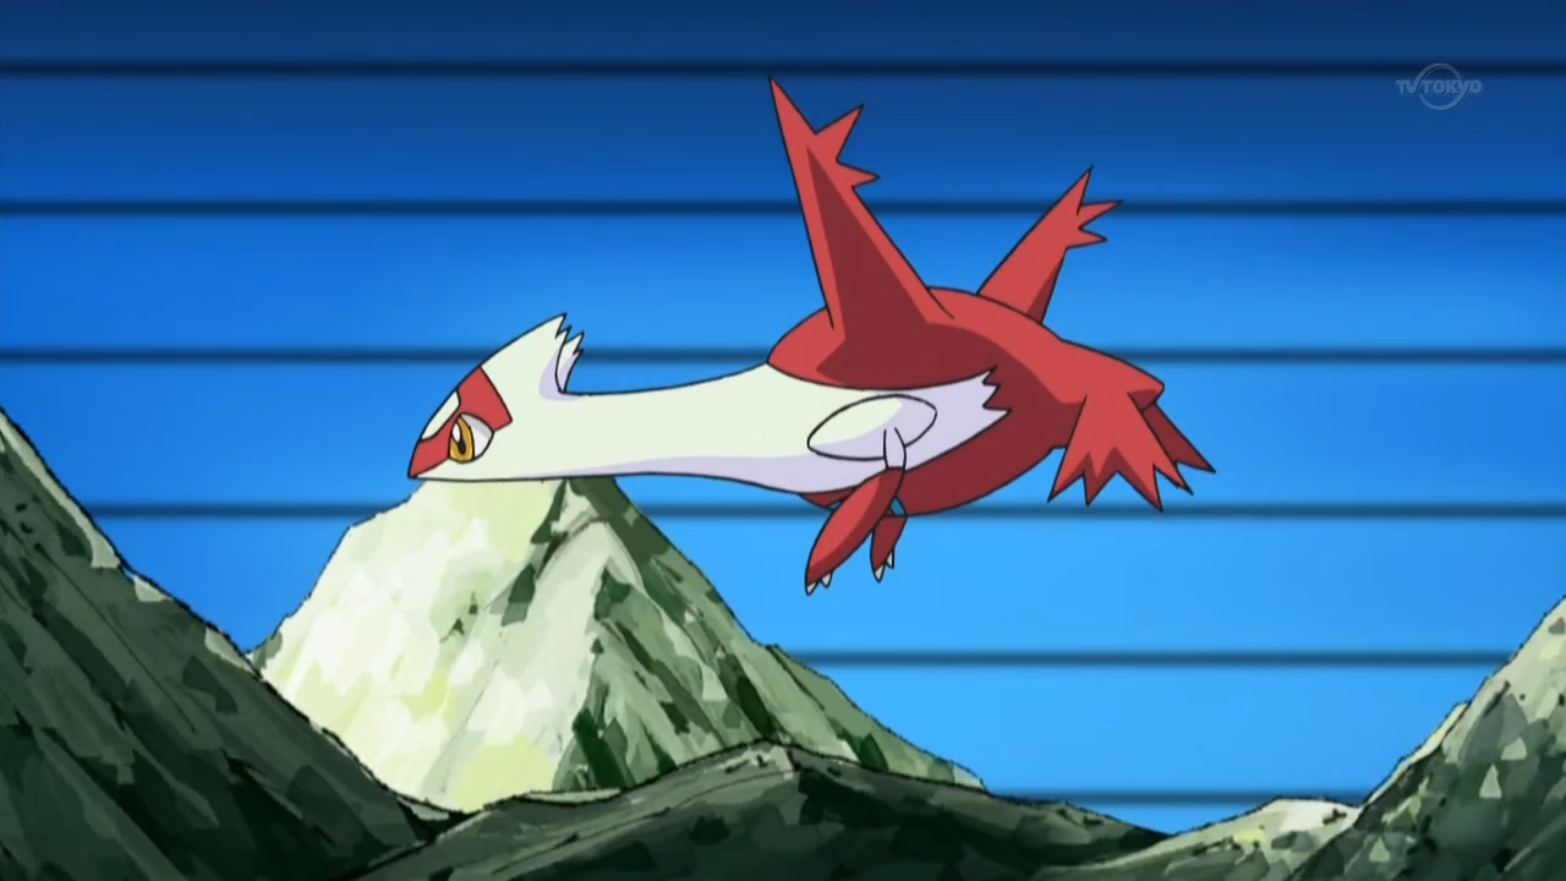 What do you think is going to happen to Latias? Made an appearance in the  episode. : r/pokemonanime